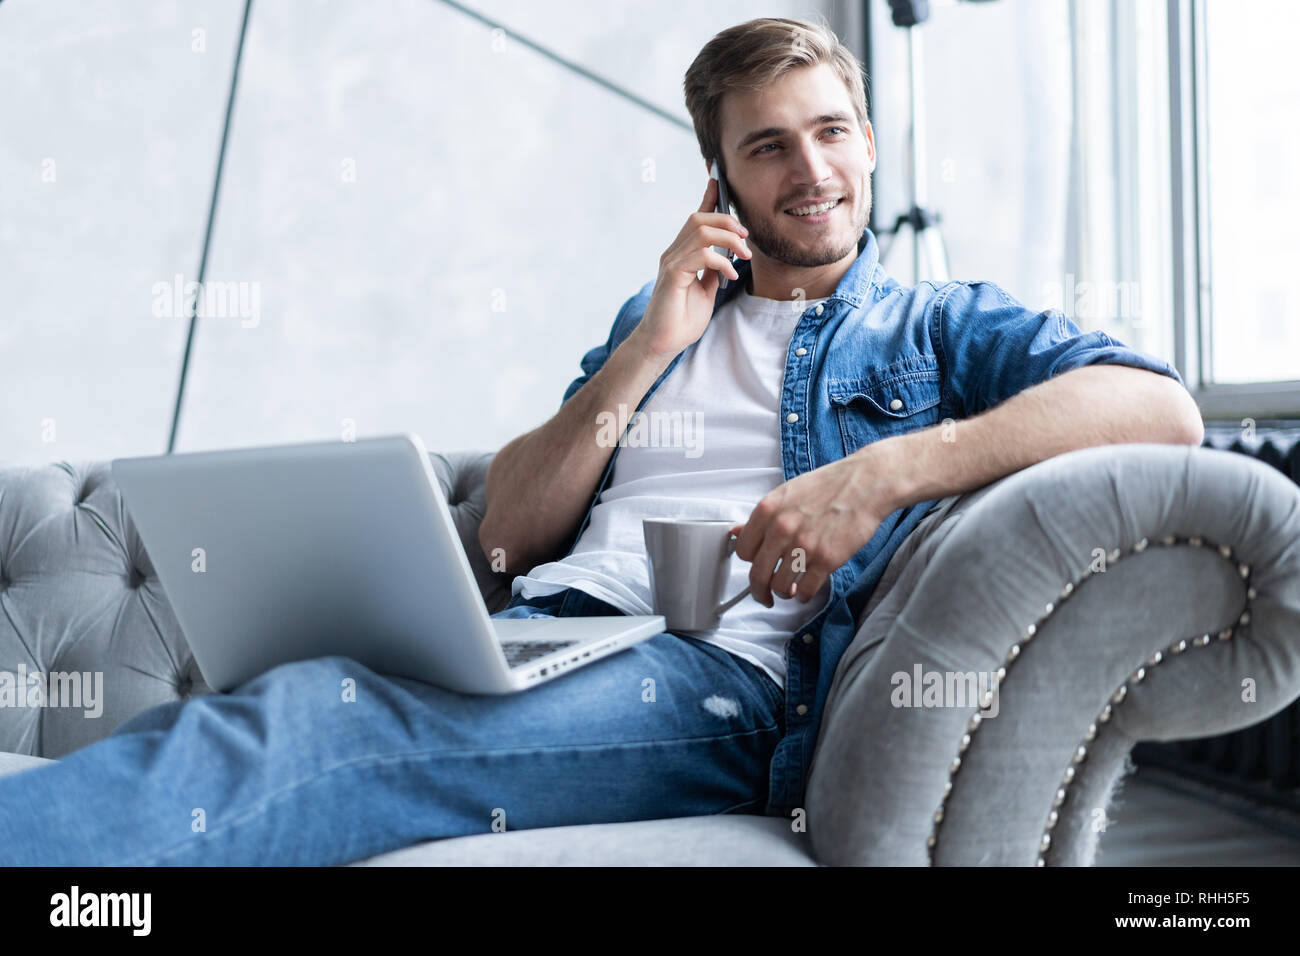 Portrait of handsome young man making a call and using his laptop while sitting on sofa at home Stock Photo